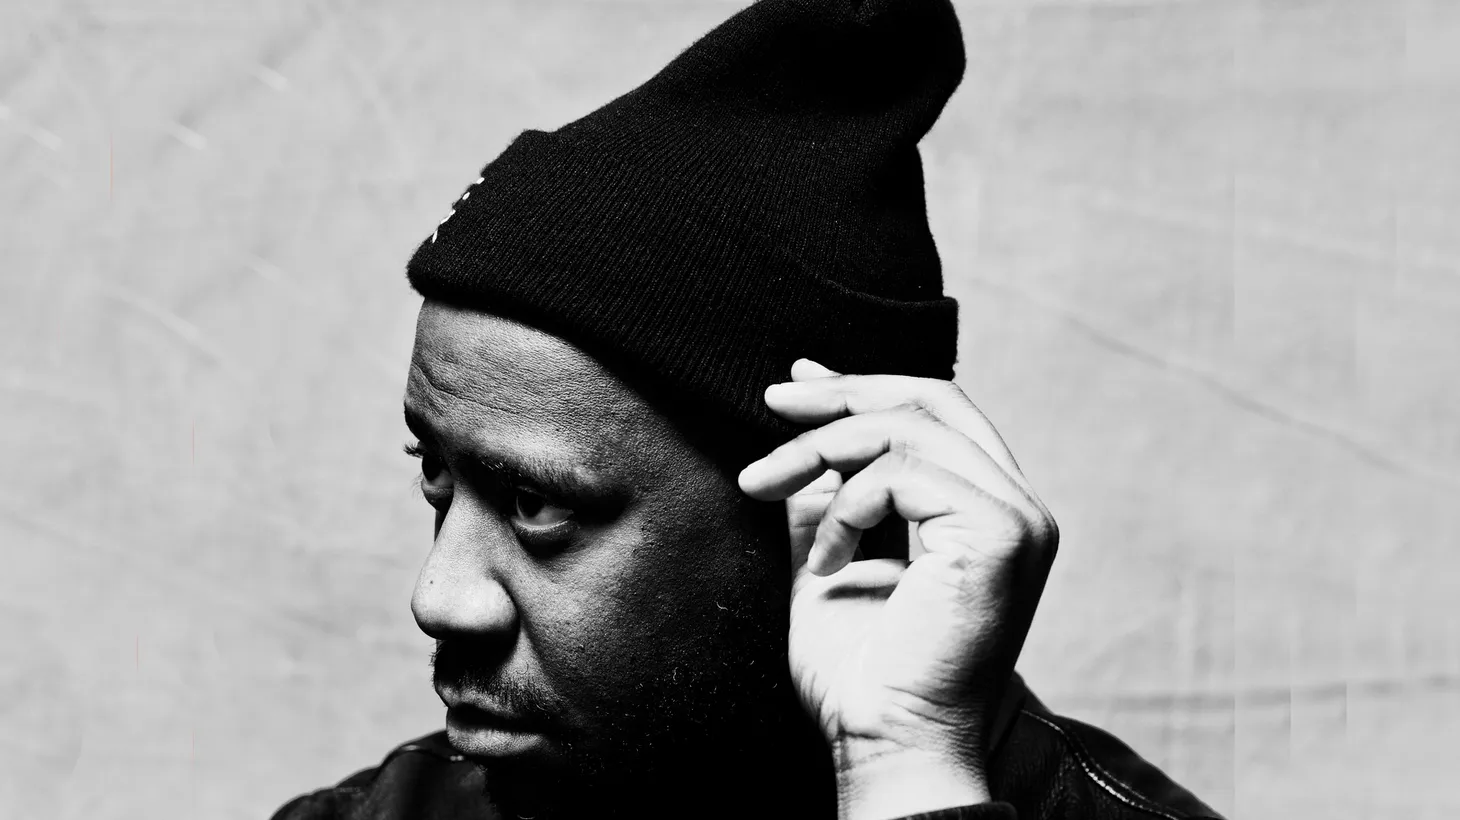 Grammy award-winning quartet the Robert Glasper Experiment have been reinventing the genre known as "jazz fusion" for years. On their latest album, ArtScience, they aim to capture the magic of their live shows.